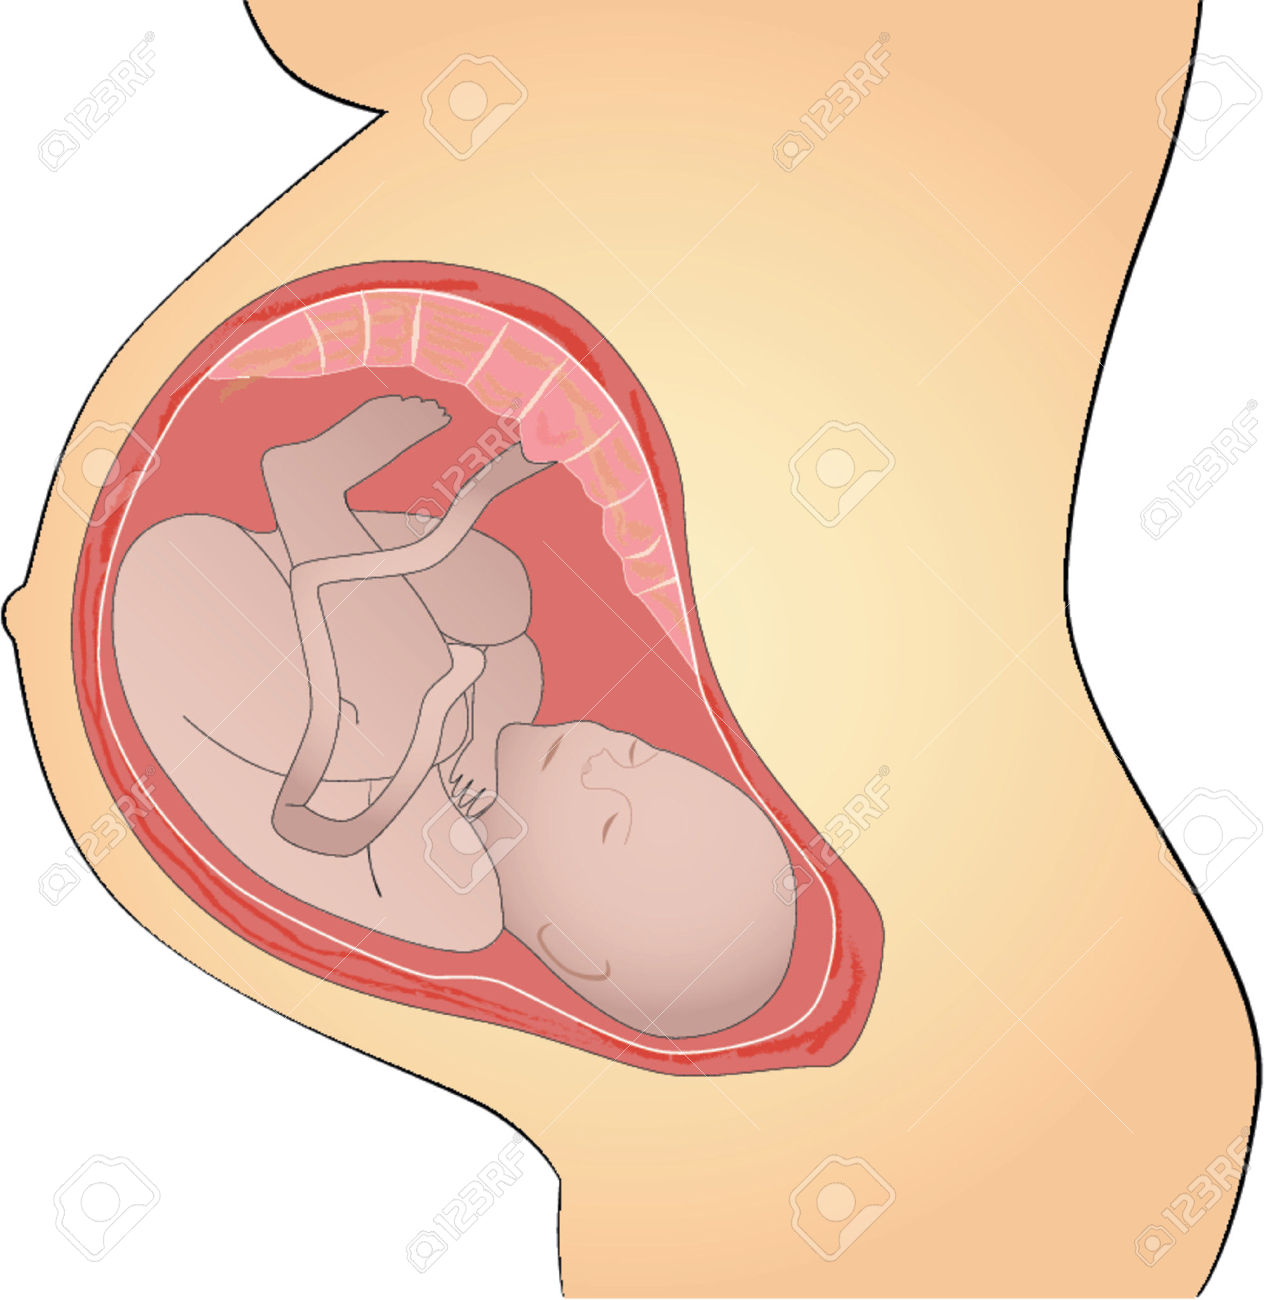 Maternity Vector Illustration Royalty Free Cliparts, Vectors, And.